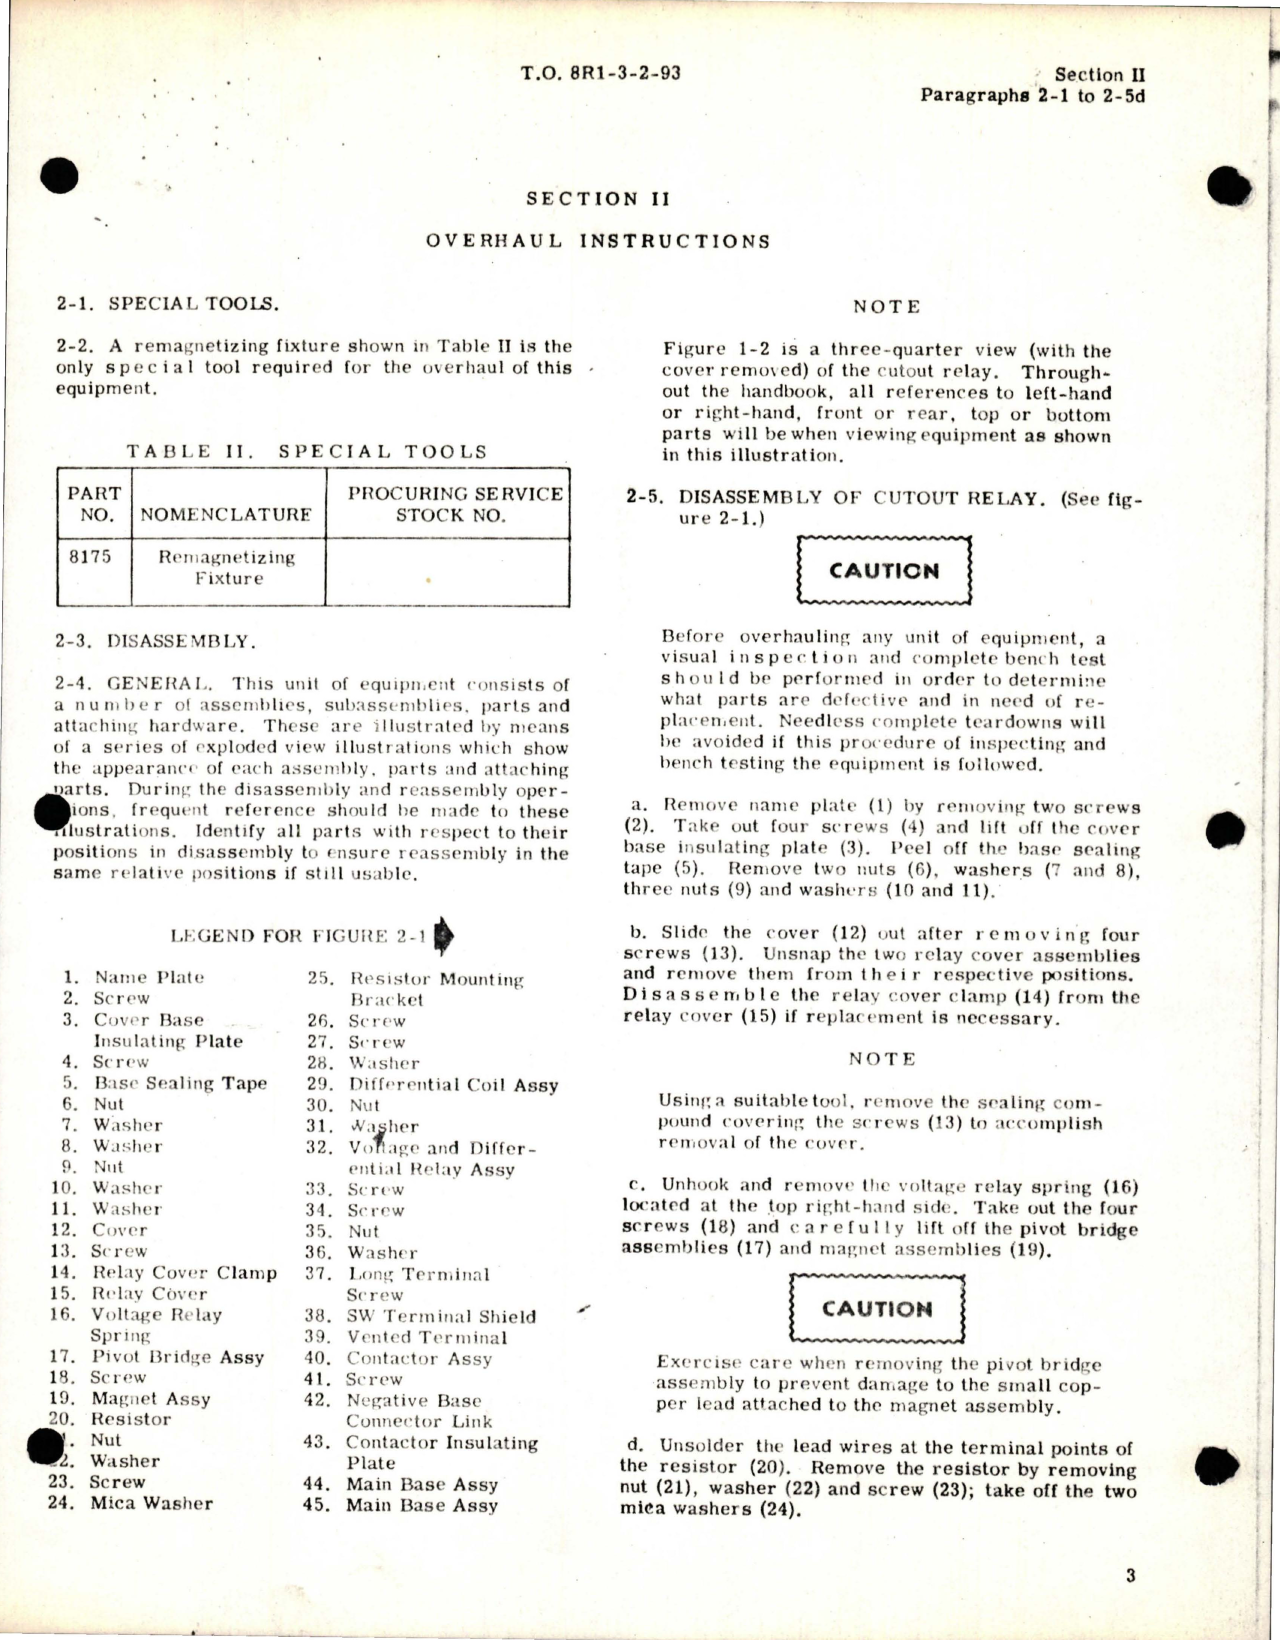 Sample page 5 from AirCorps Library document: Overhaul Instructions for Reverse Current Cutout Relay - Parts A-700AP and A-718AP